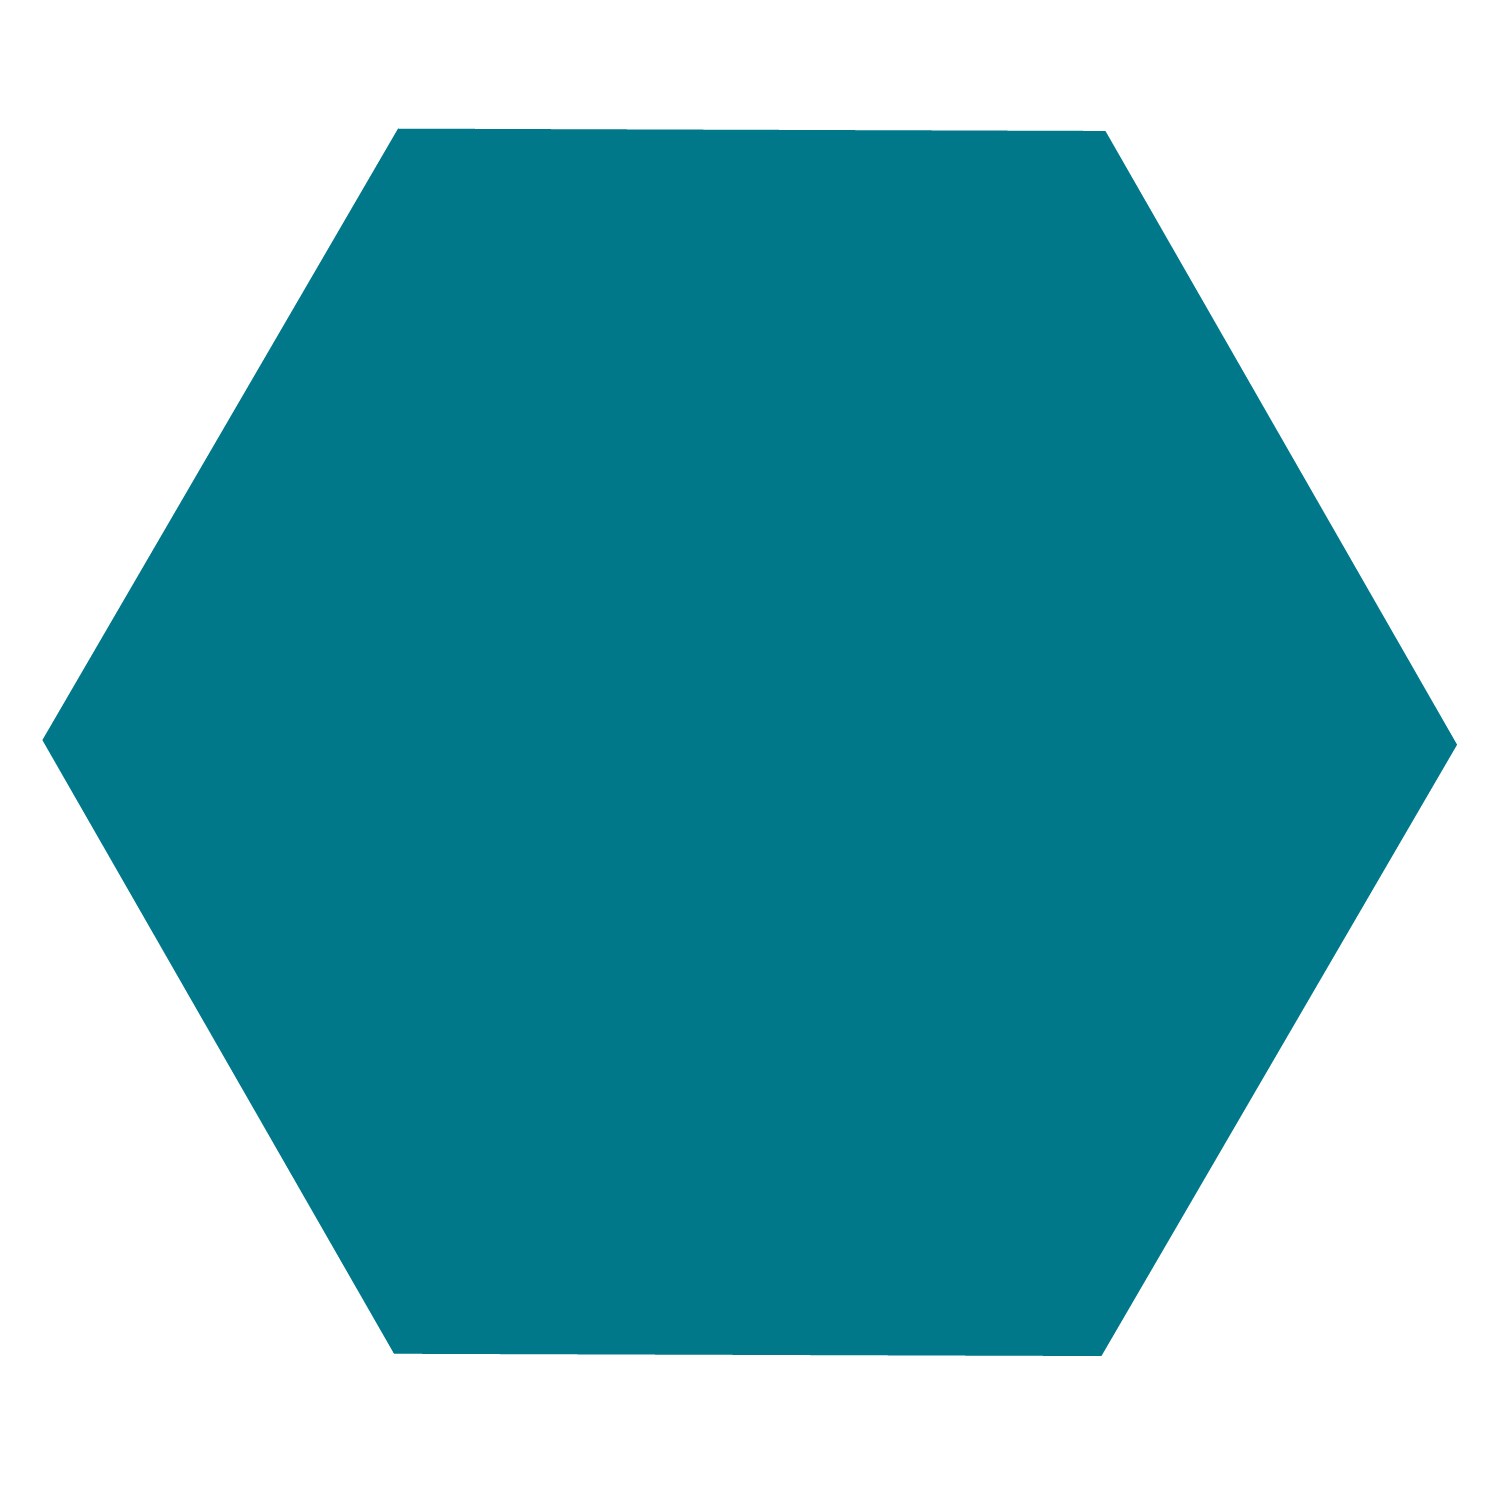 Free Hexagon Download Free Hexagon Png Images Free Cliparts On Clipart Library